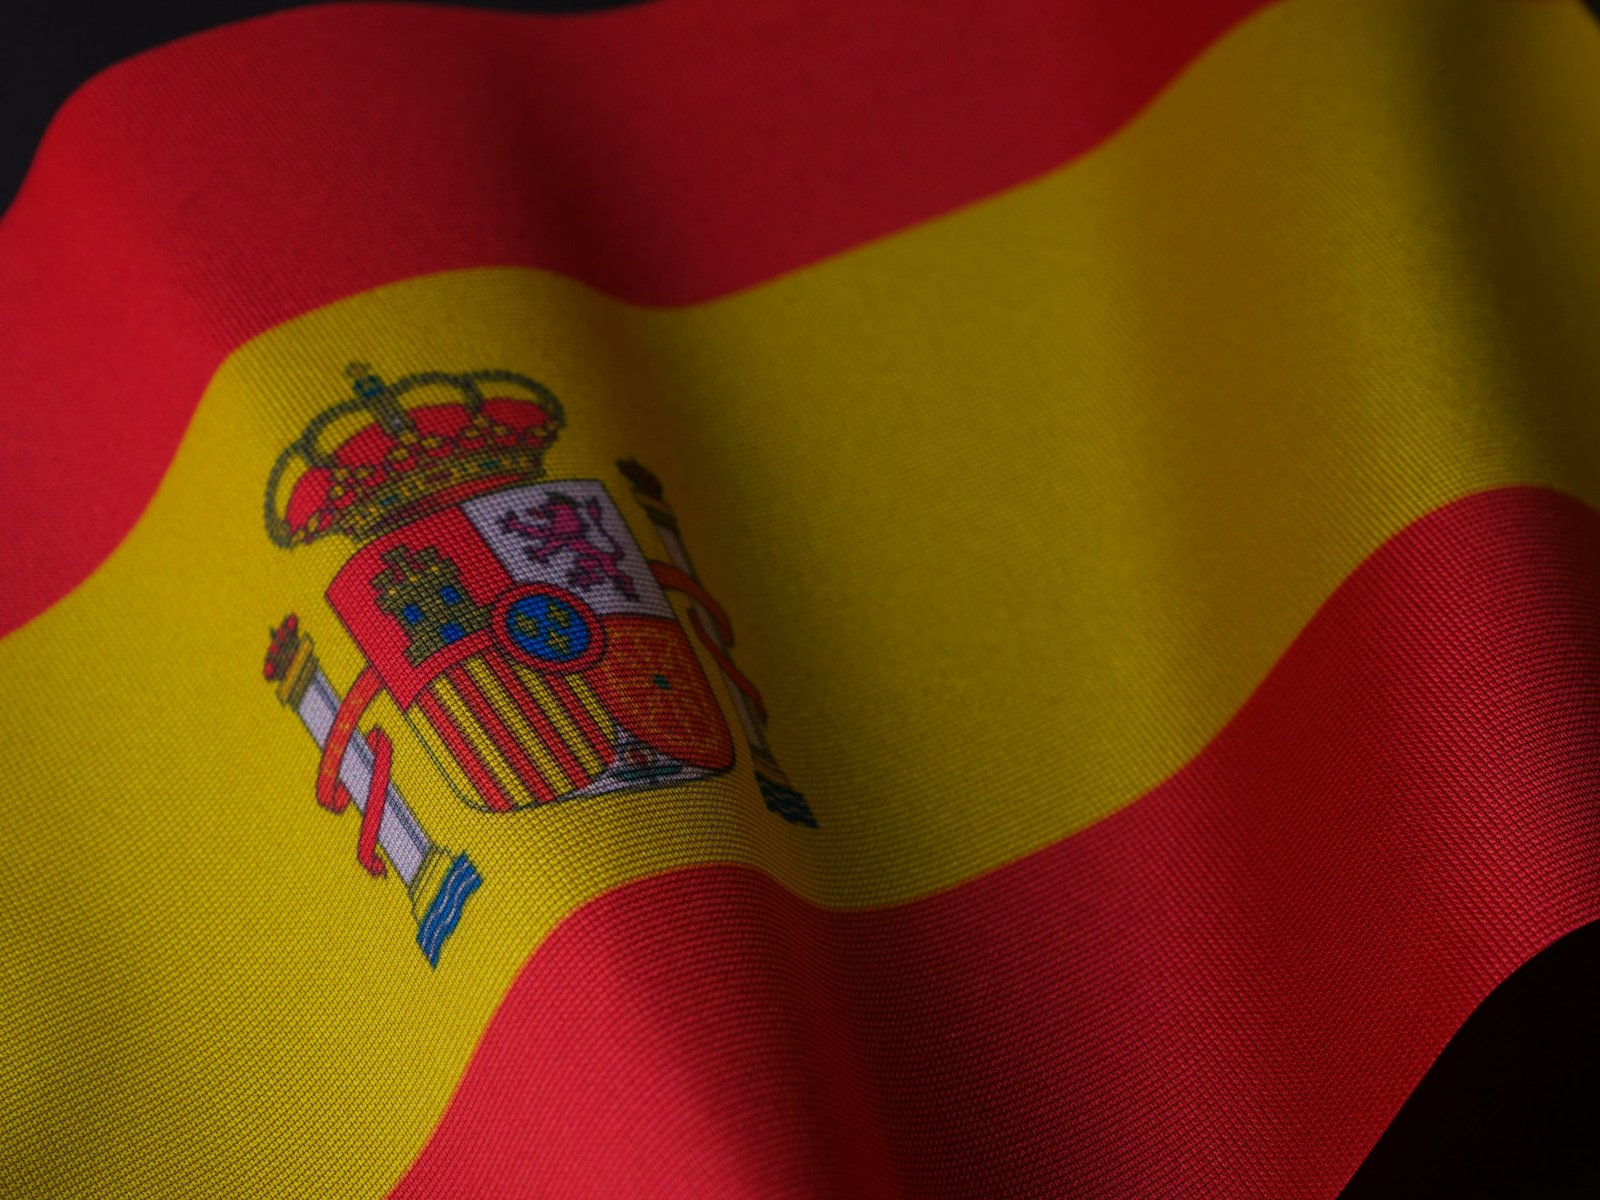 Microsoft is quadrupling its AI investment in Spain